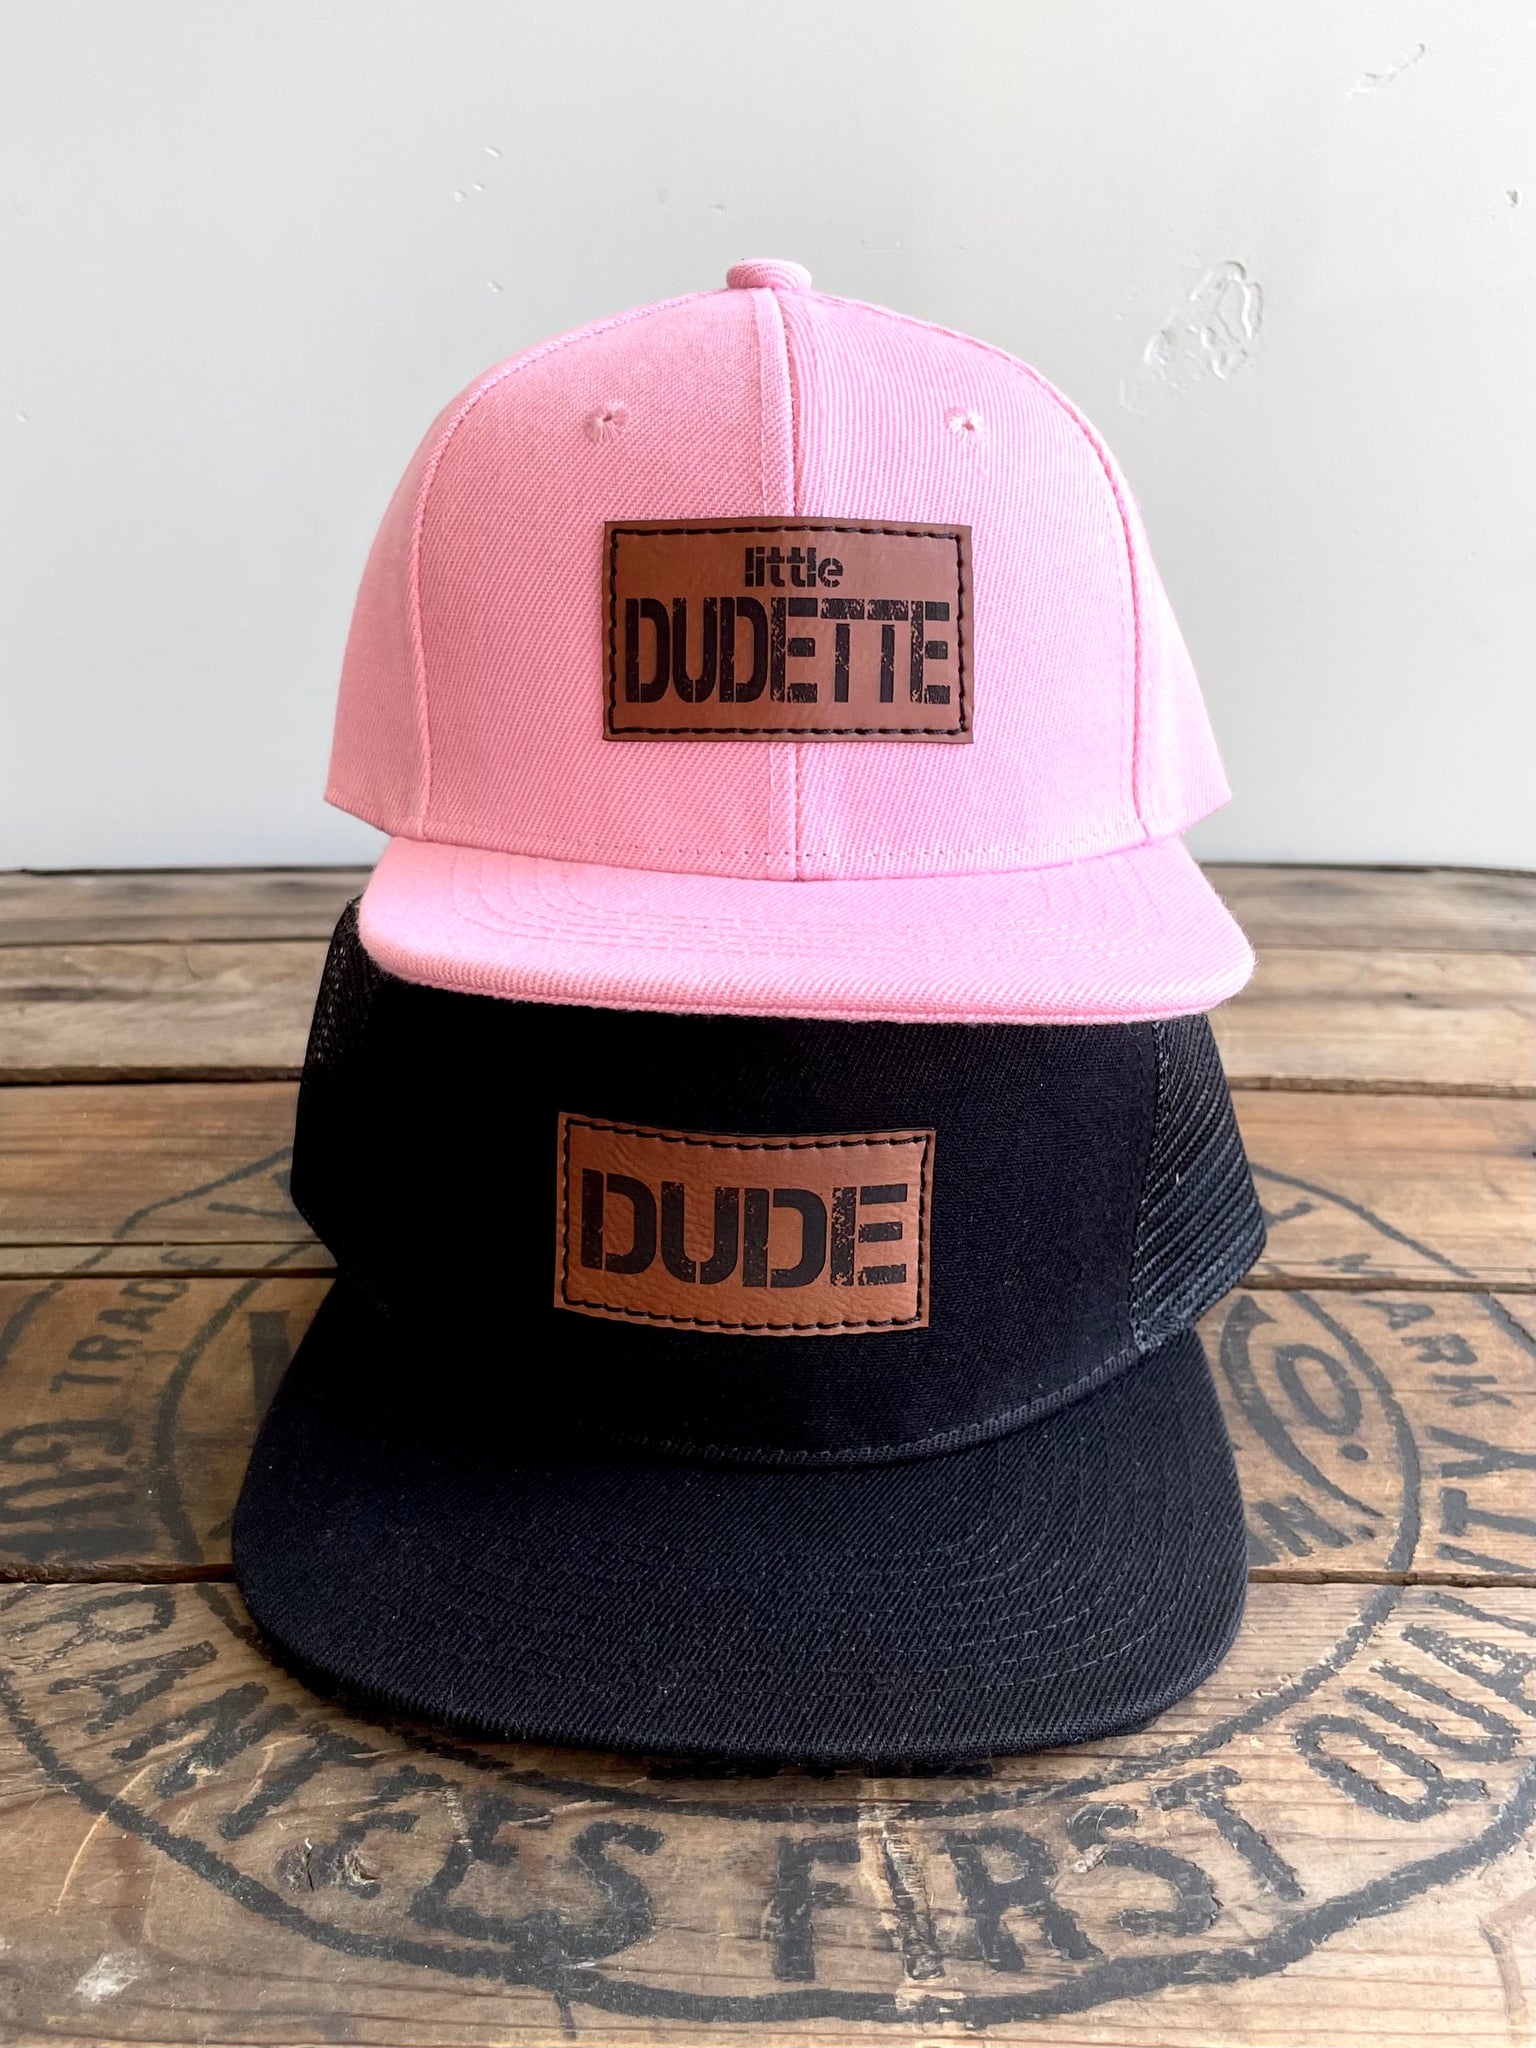 The Dude Father/Son Snapback Hats Set - Fox + Fawn Designs Youth (Dude) and Toddler (Little Dude) / Black